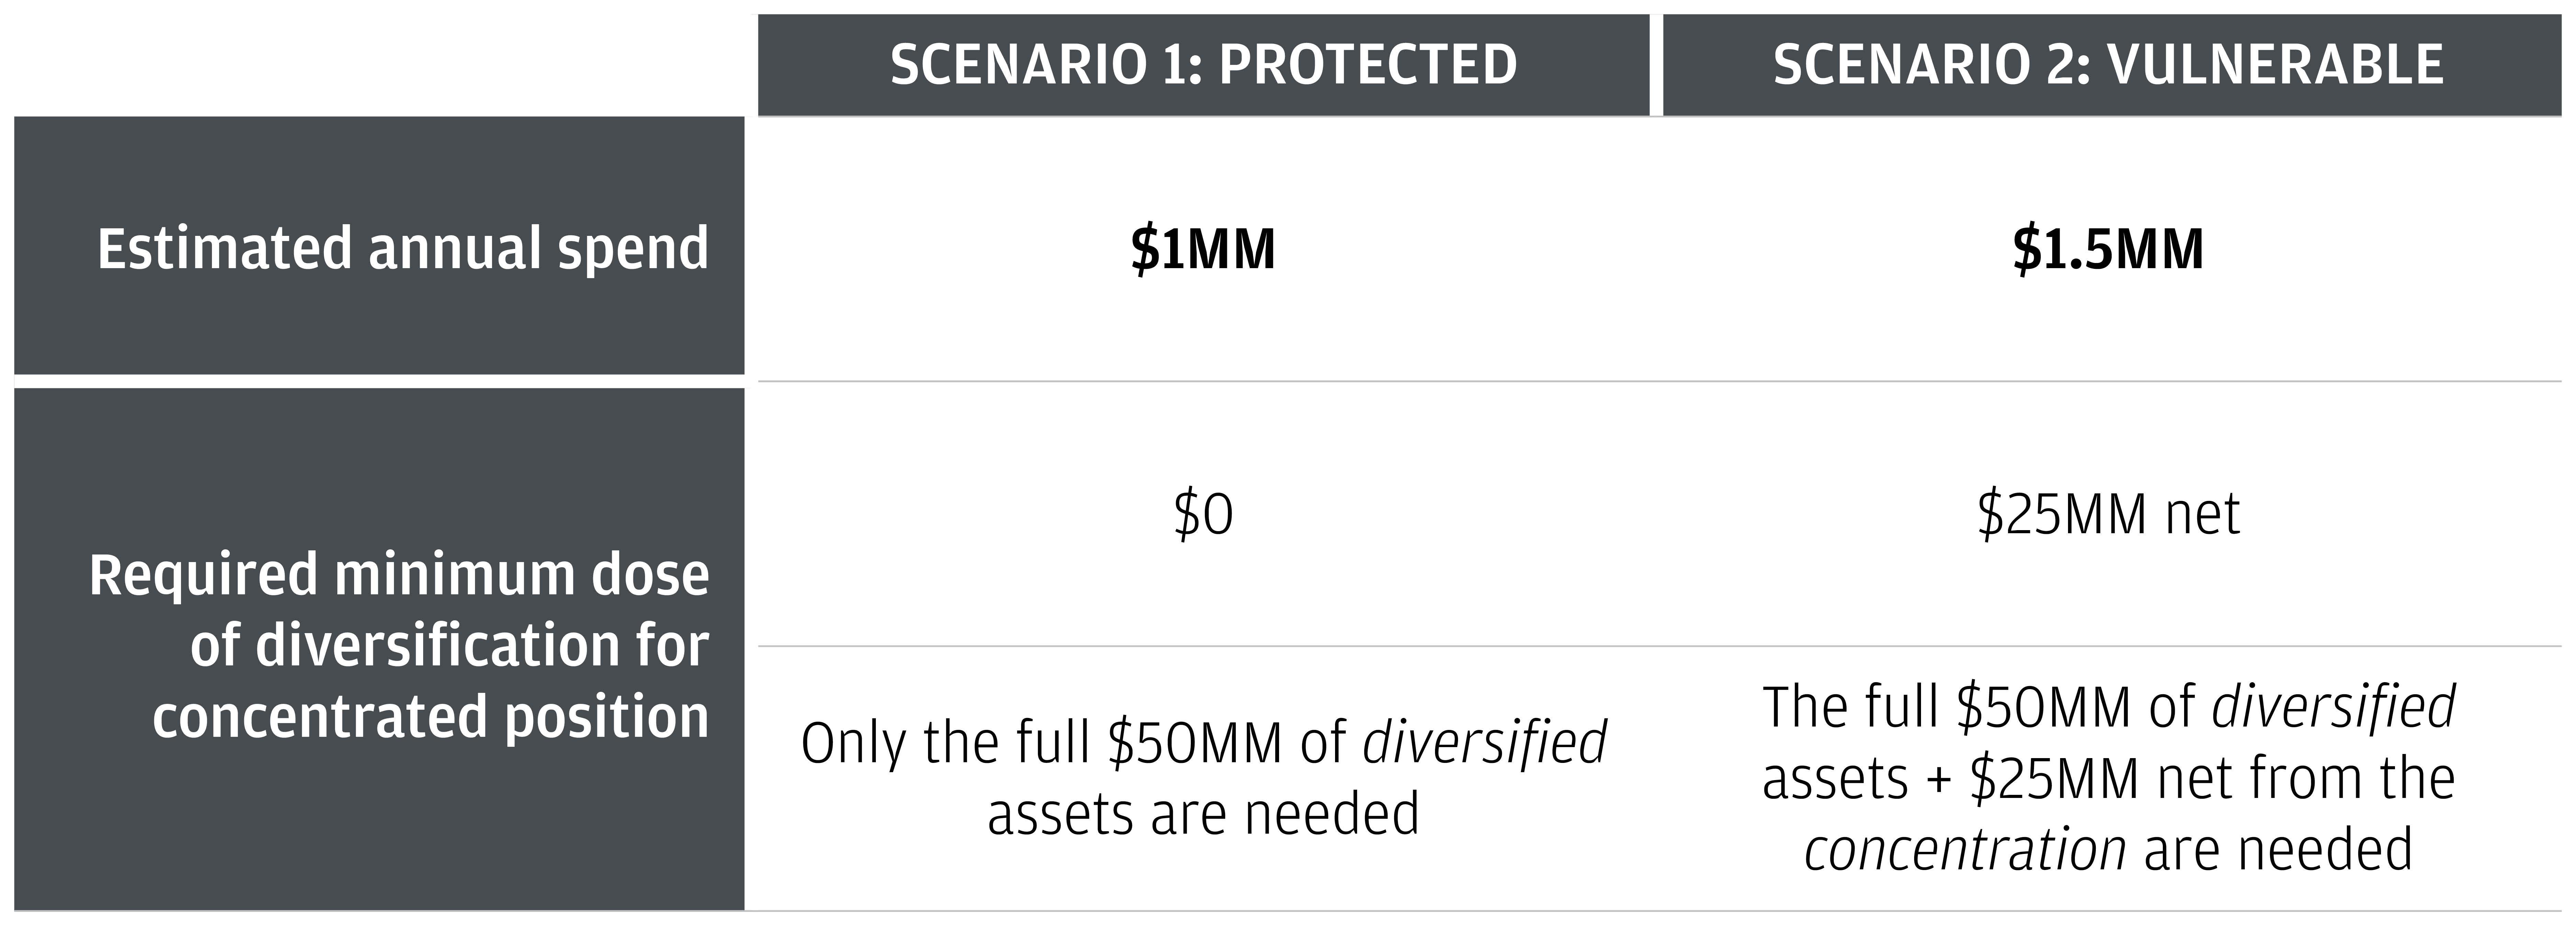 This table shows a 50-year-old’s required minimum diversification for a concentrated stock if they spend $1MM per year versus $1.5MM per year. 